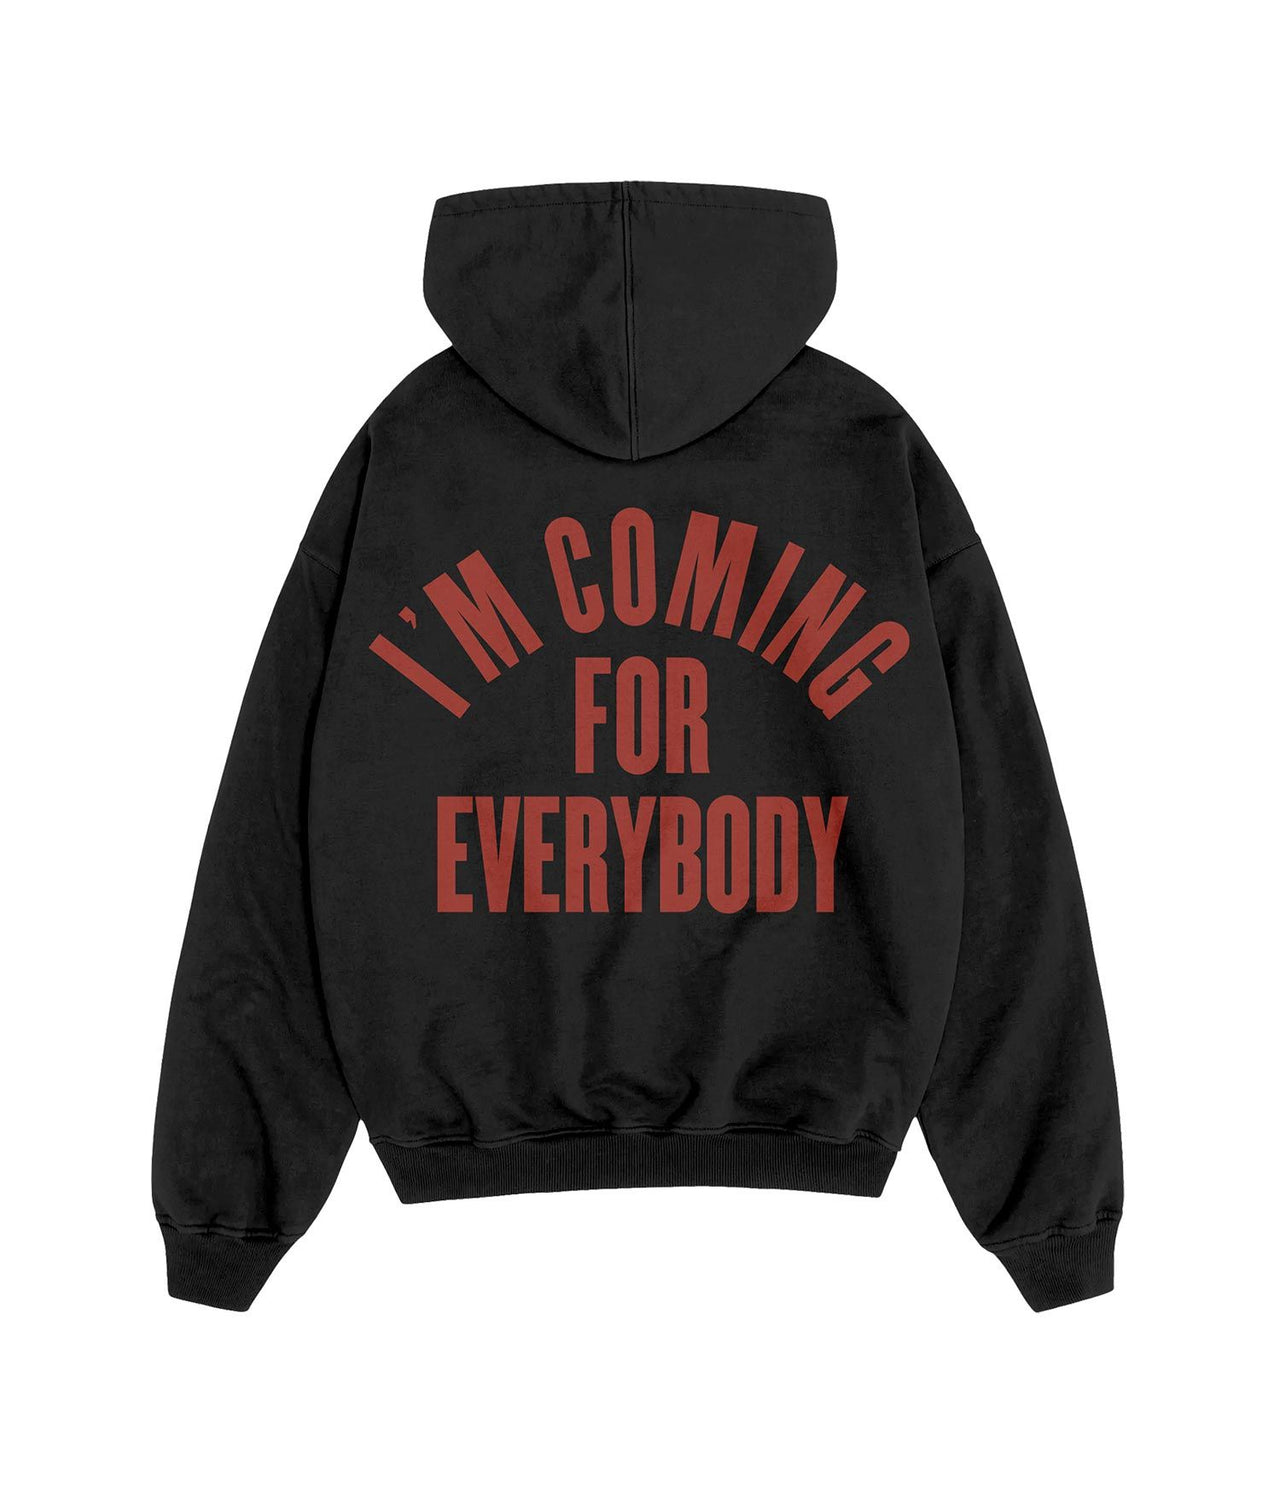 I’m Coming for Everybody Hoodie